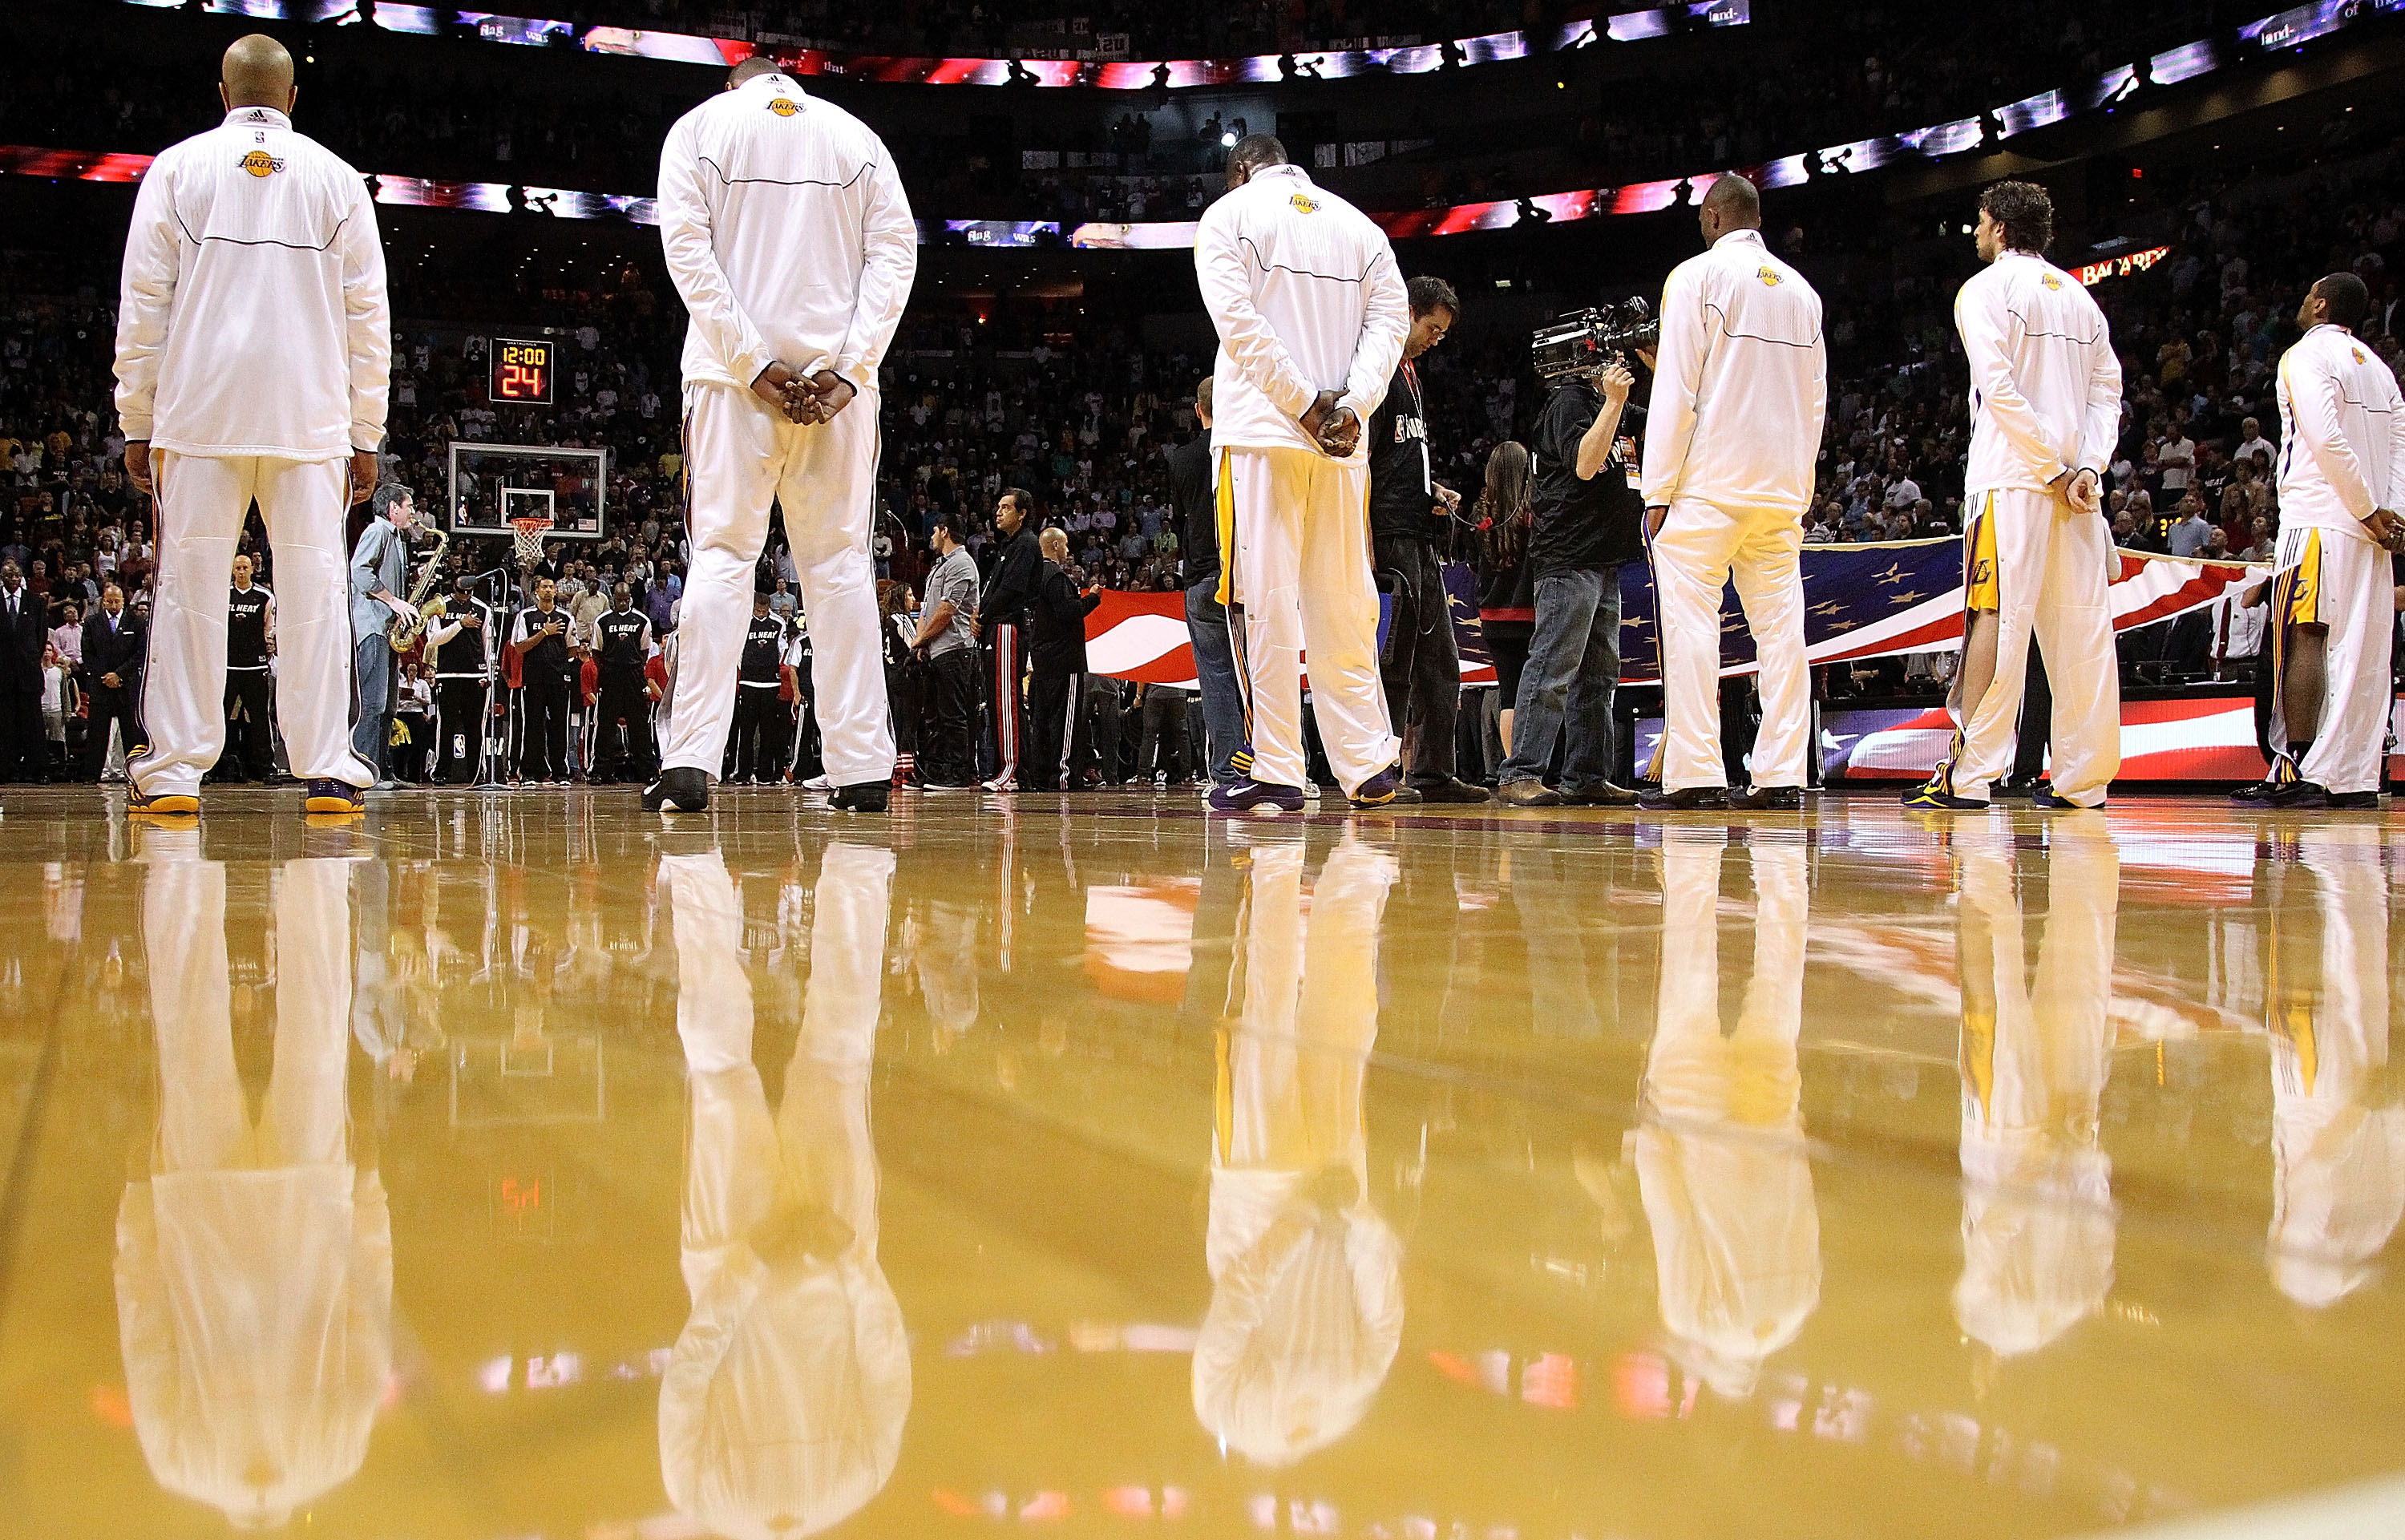 MIAMI, FL - MARCH 10:  The Los Angeles Lakers look on during the national anthem during a game against the Miami Heat at American Airlines Arena on March 10, 2011 in Miami, Florida. NOTE TO USER: User expressly acknowledges and agrees that, by downloading